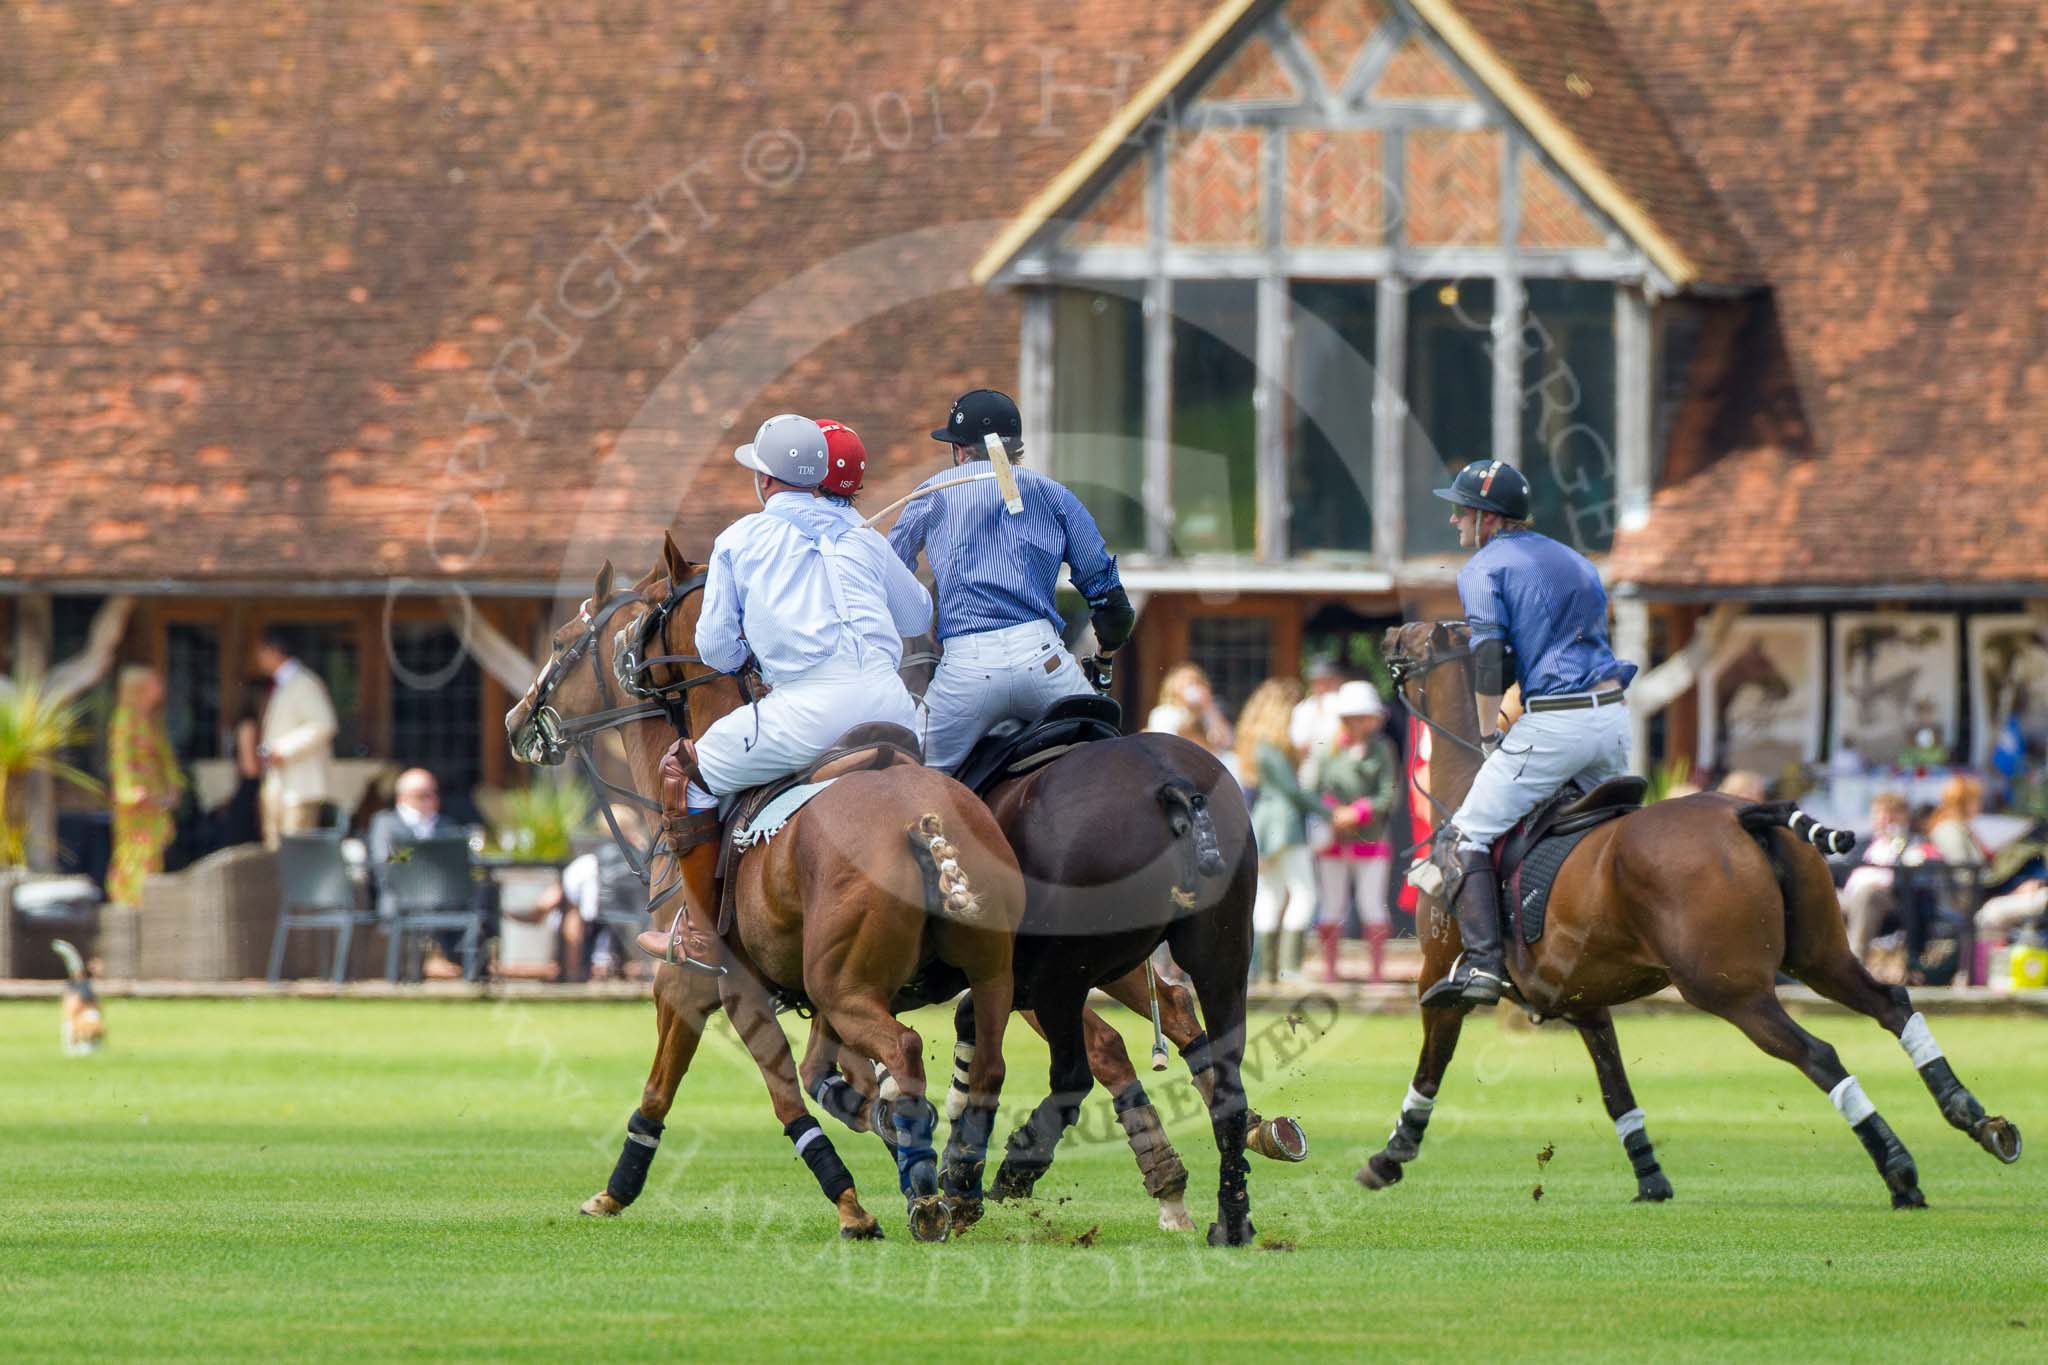 7th Heritage Polo Cup finals: Silver Fox USA v La Mariposa Argentina FINAL..
Hurtwood Park Polo Club,
Ewhurst Green,
Surrey,
United Kingdom,
on 05 August 2012 at 13:51, image #50